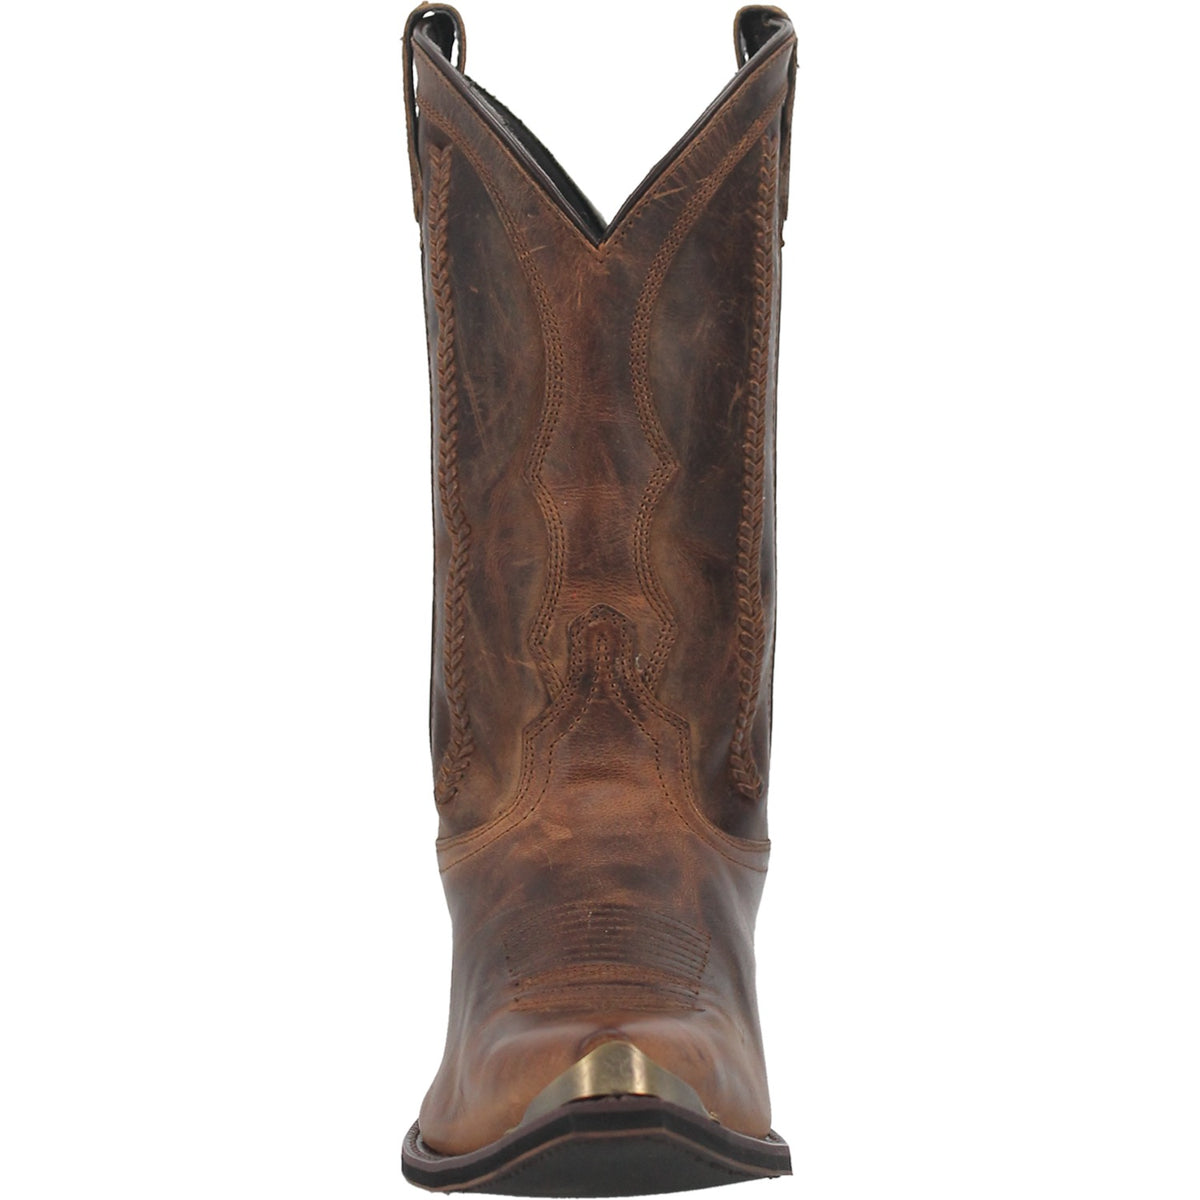 MURPHY LEATHER BOOT Cover